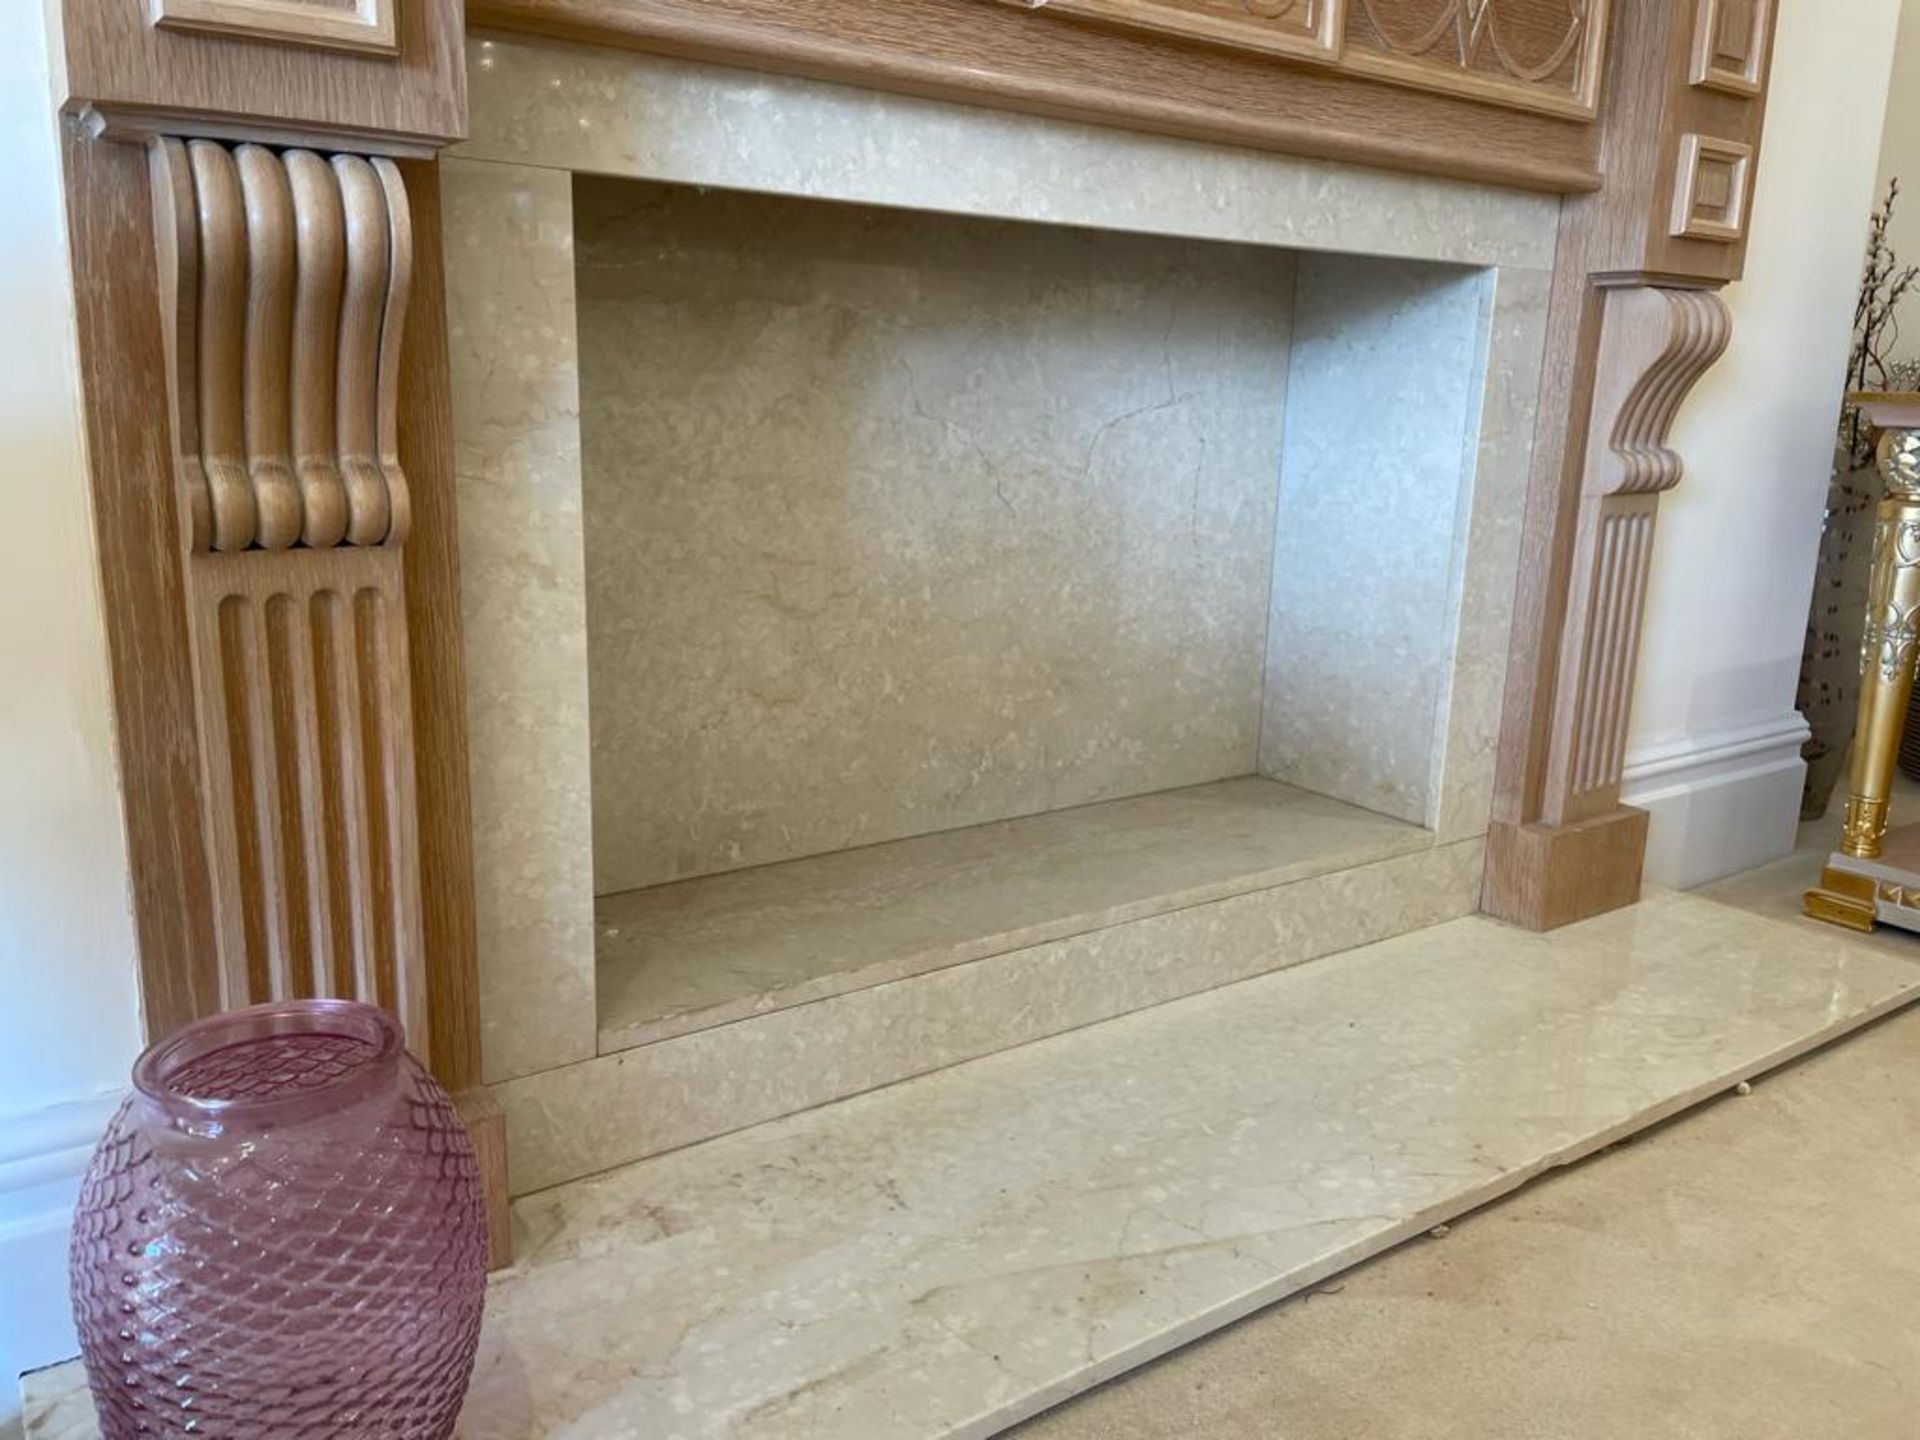 1 x Wooden Fire Surround With Marble Fire Place and Hearth - Size H118 x W174 x D14 cms With 180 x - Image 12 of 21